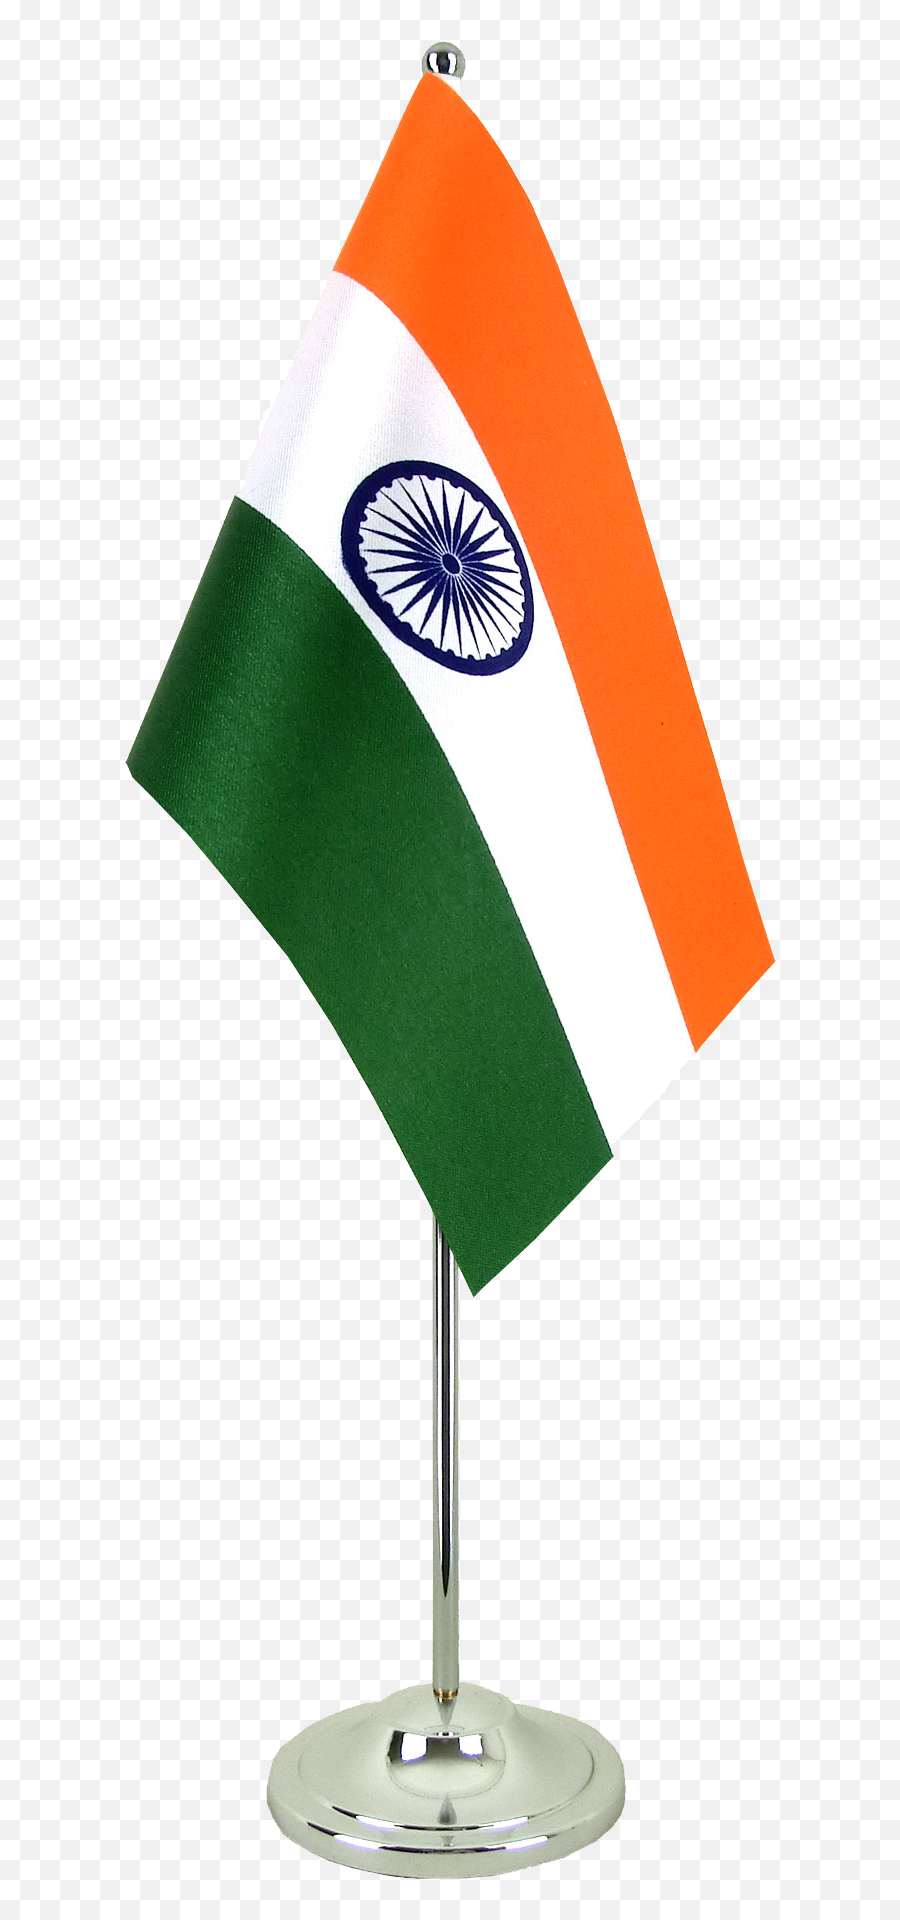 Indian National Flag PNG - Photo #2062 - PngFile.net | Free PNG Images  Download